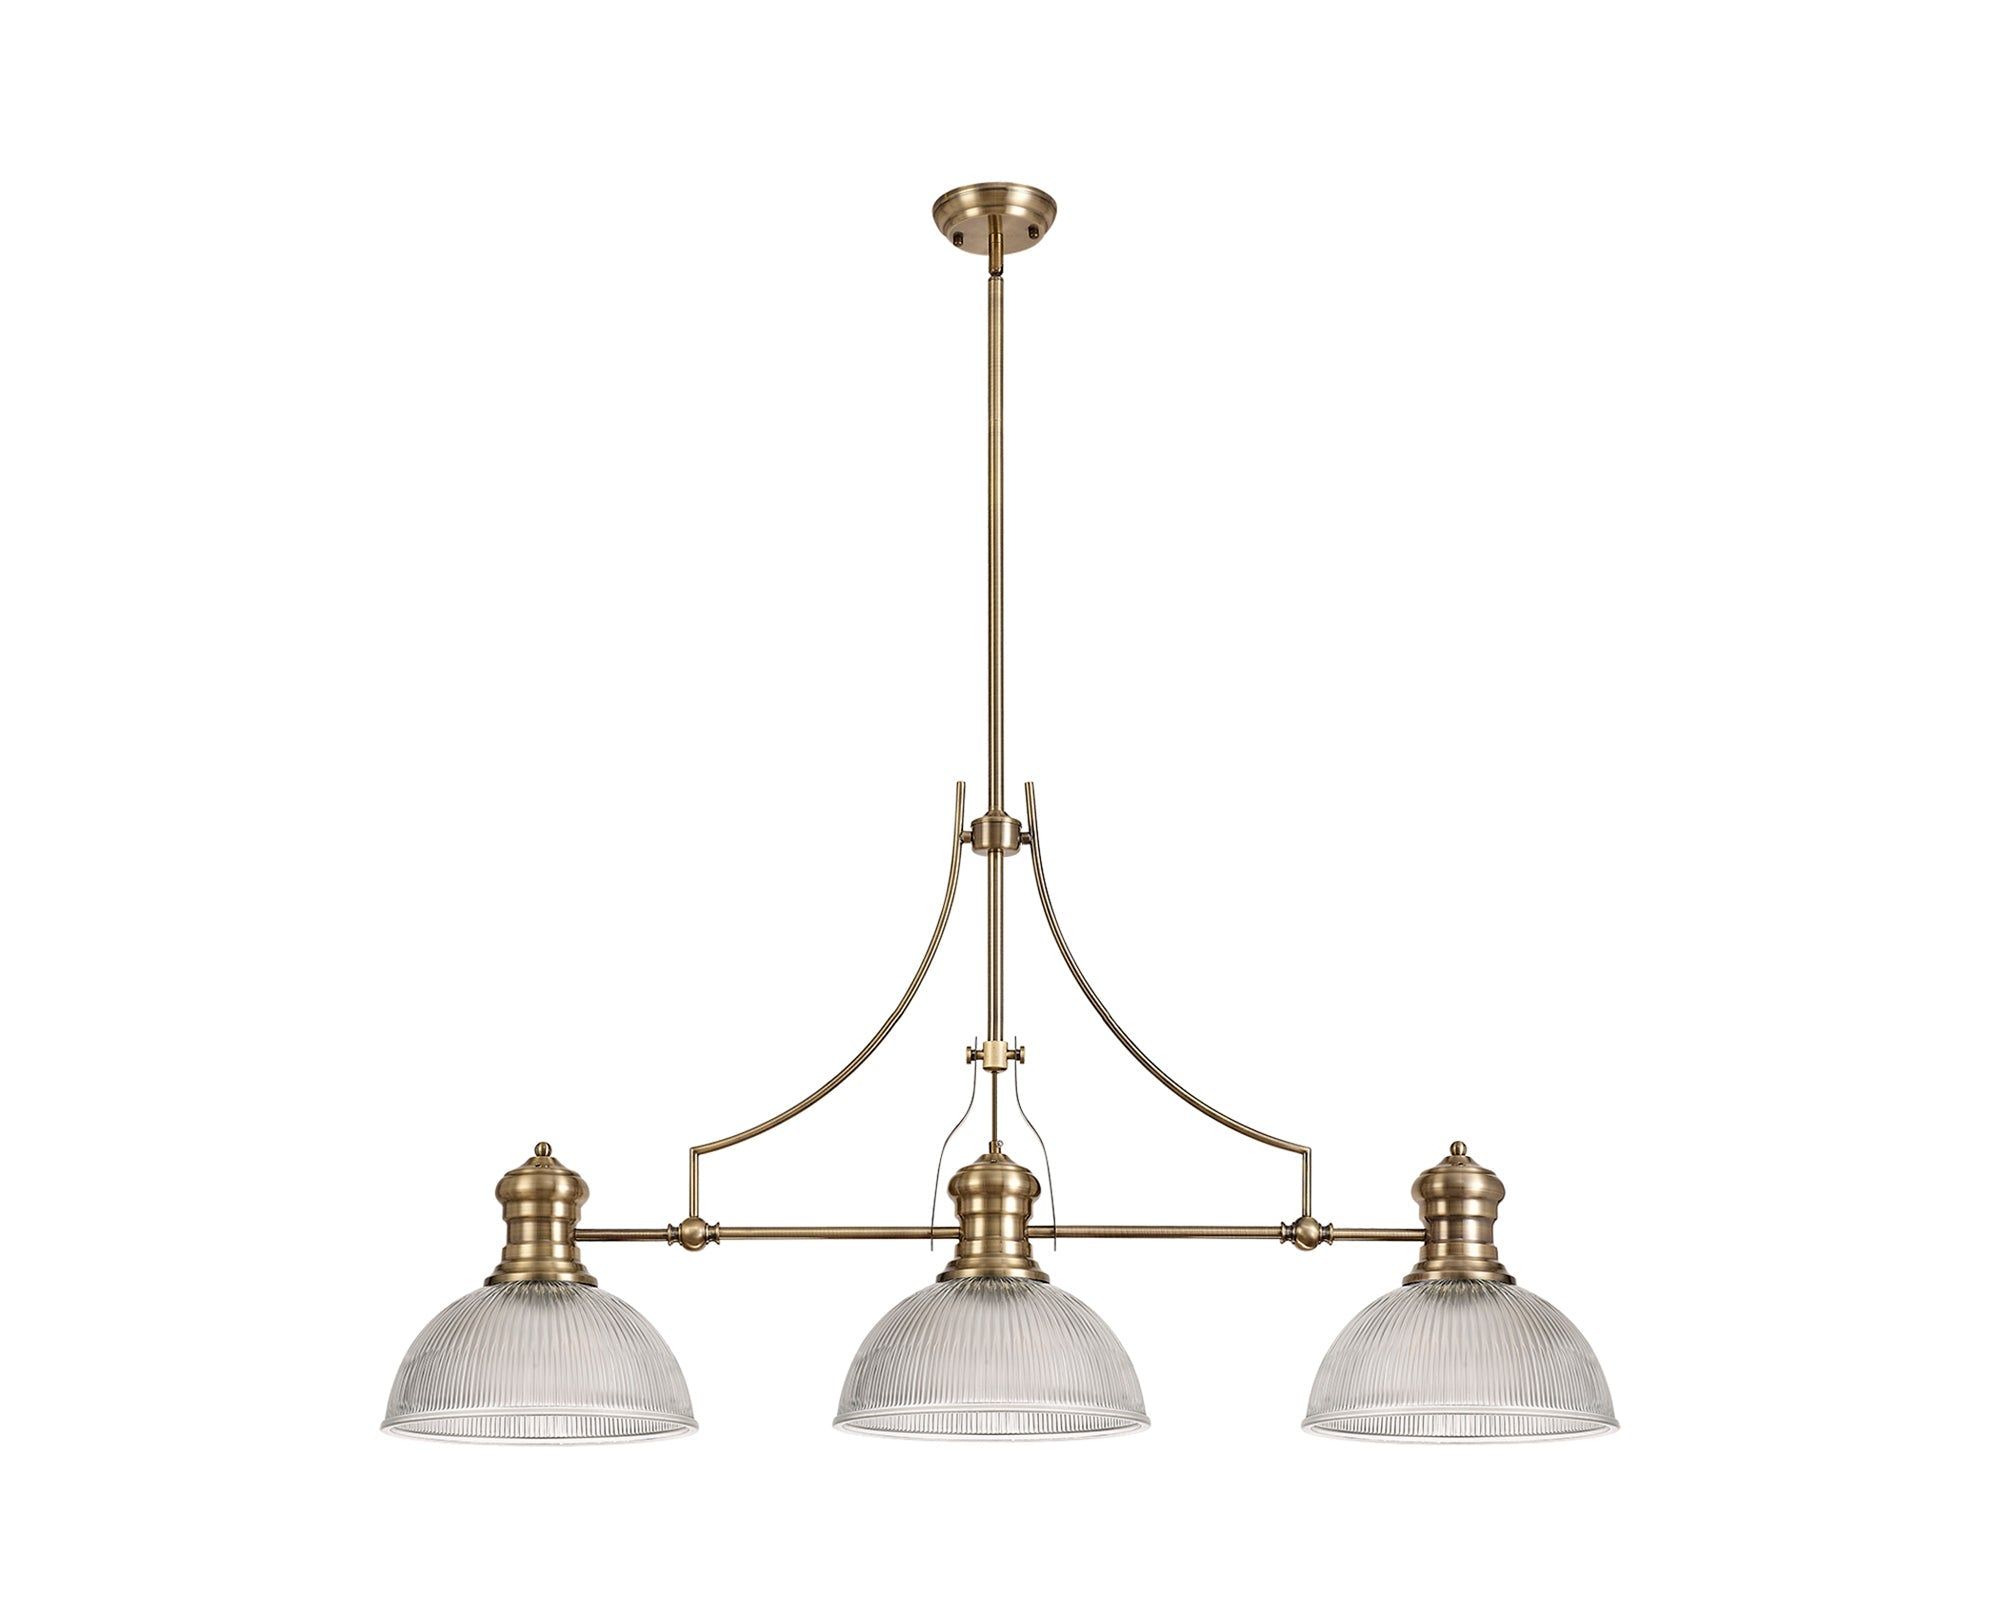 Savannah 3 Light Linear Pendant E27 With 30cm Dome Glass Shade, Antique Brass, Clear